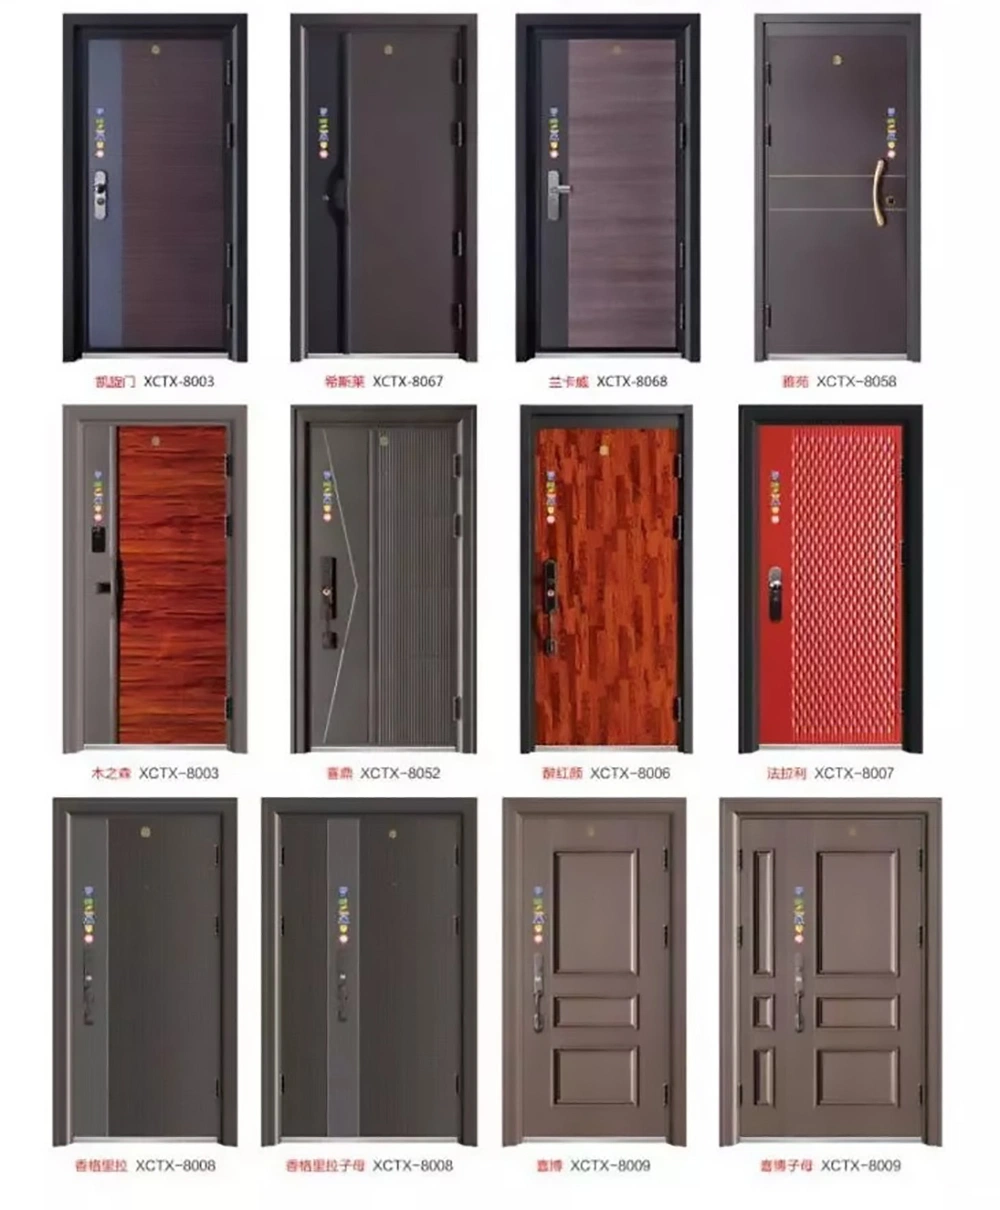 Entry Extrance Modern Front Louvered with Sidelights Exterior Security Steel / Aluminum / Metal Door